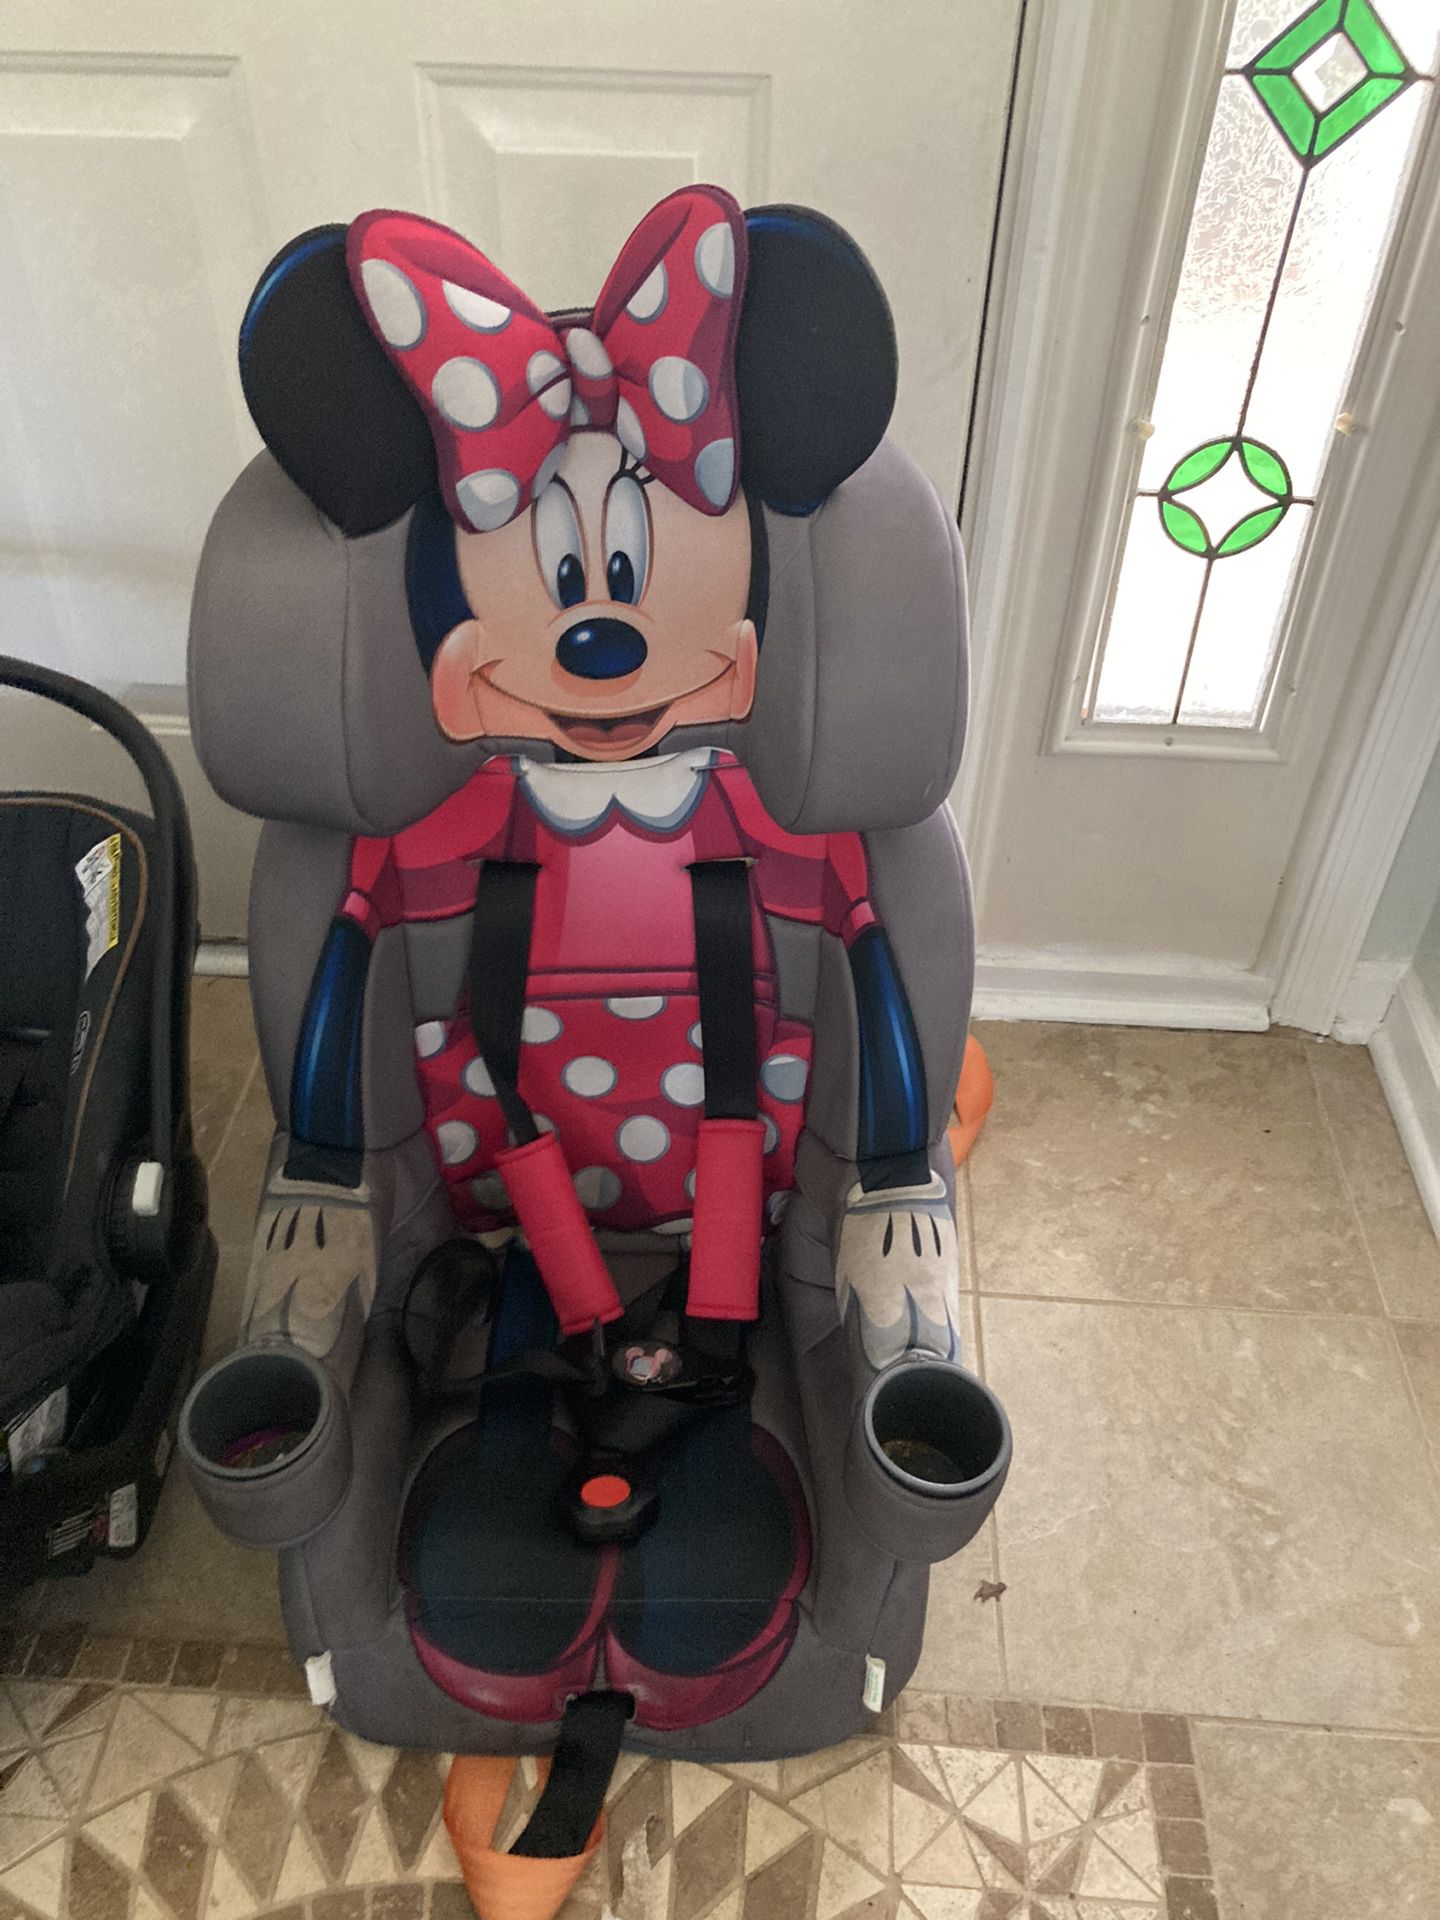 Toddler Minnie Mouse Car Seat & Graco Infant Car Seat